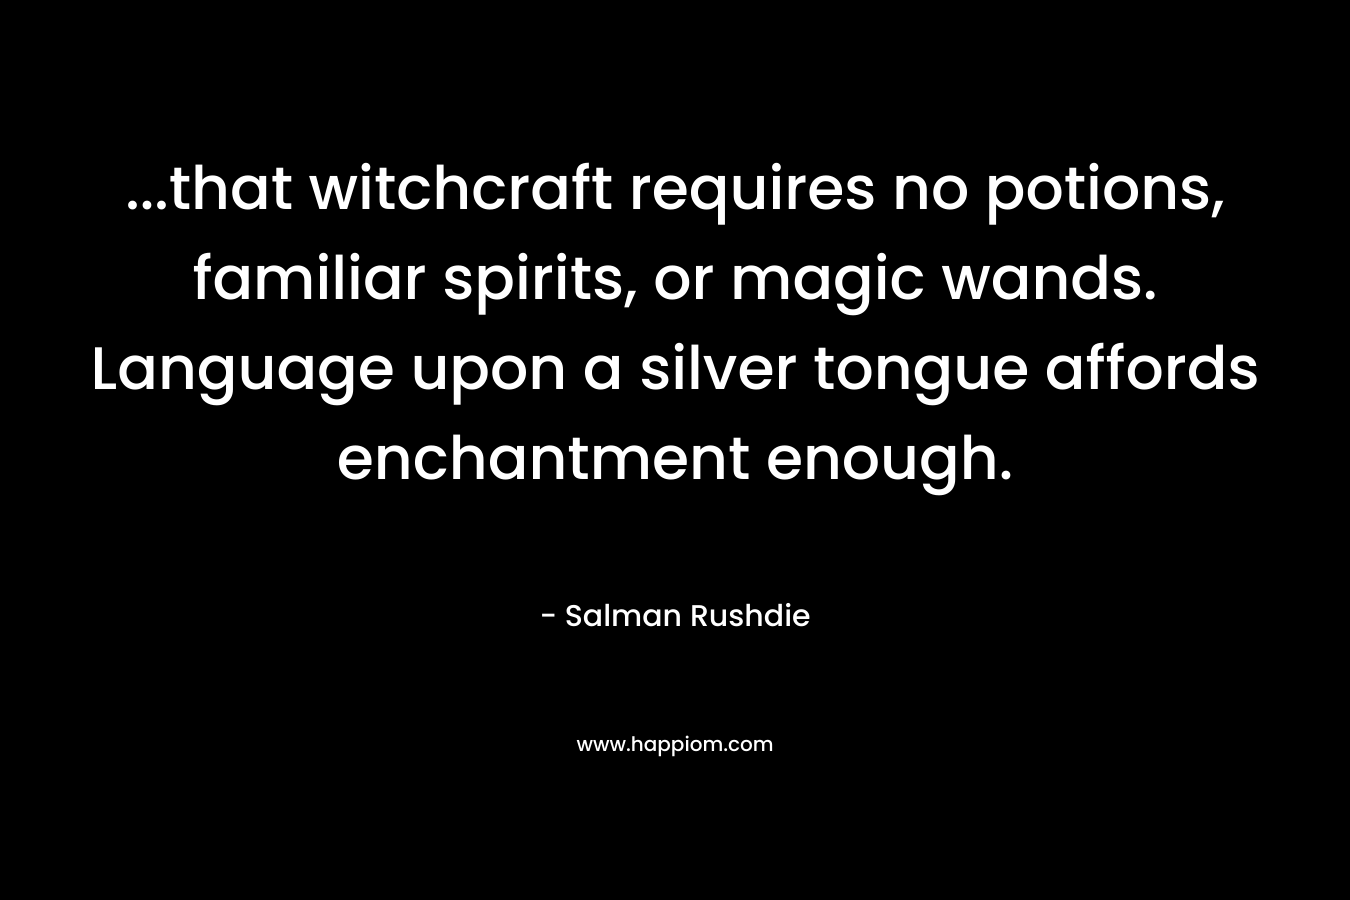 …that witchcraft requires no potions, familiar spirits, or magic wands. Language upon a silver tongue affords enchantment enough. – Salman Rushdie